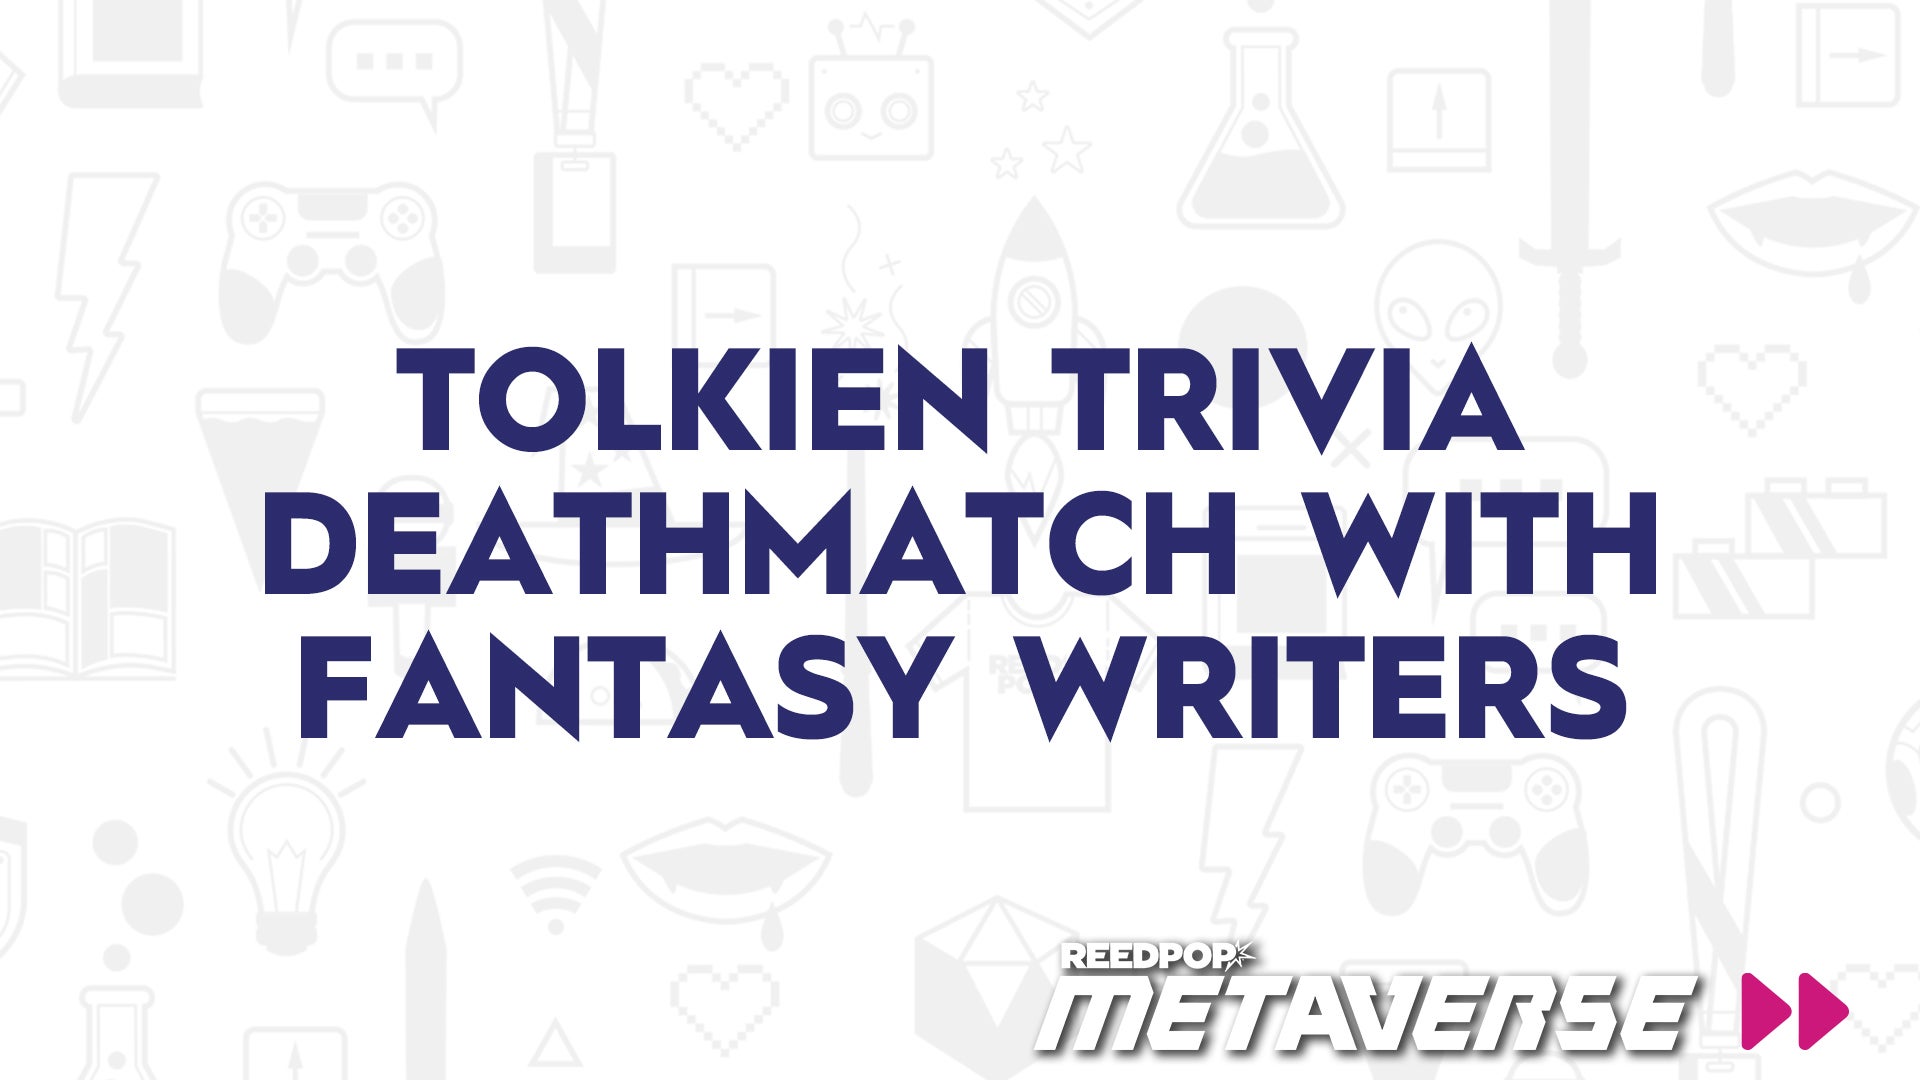 Image for Tolkien Trivia Deathmatch with Fantasy Writers